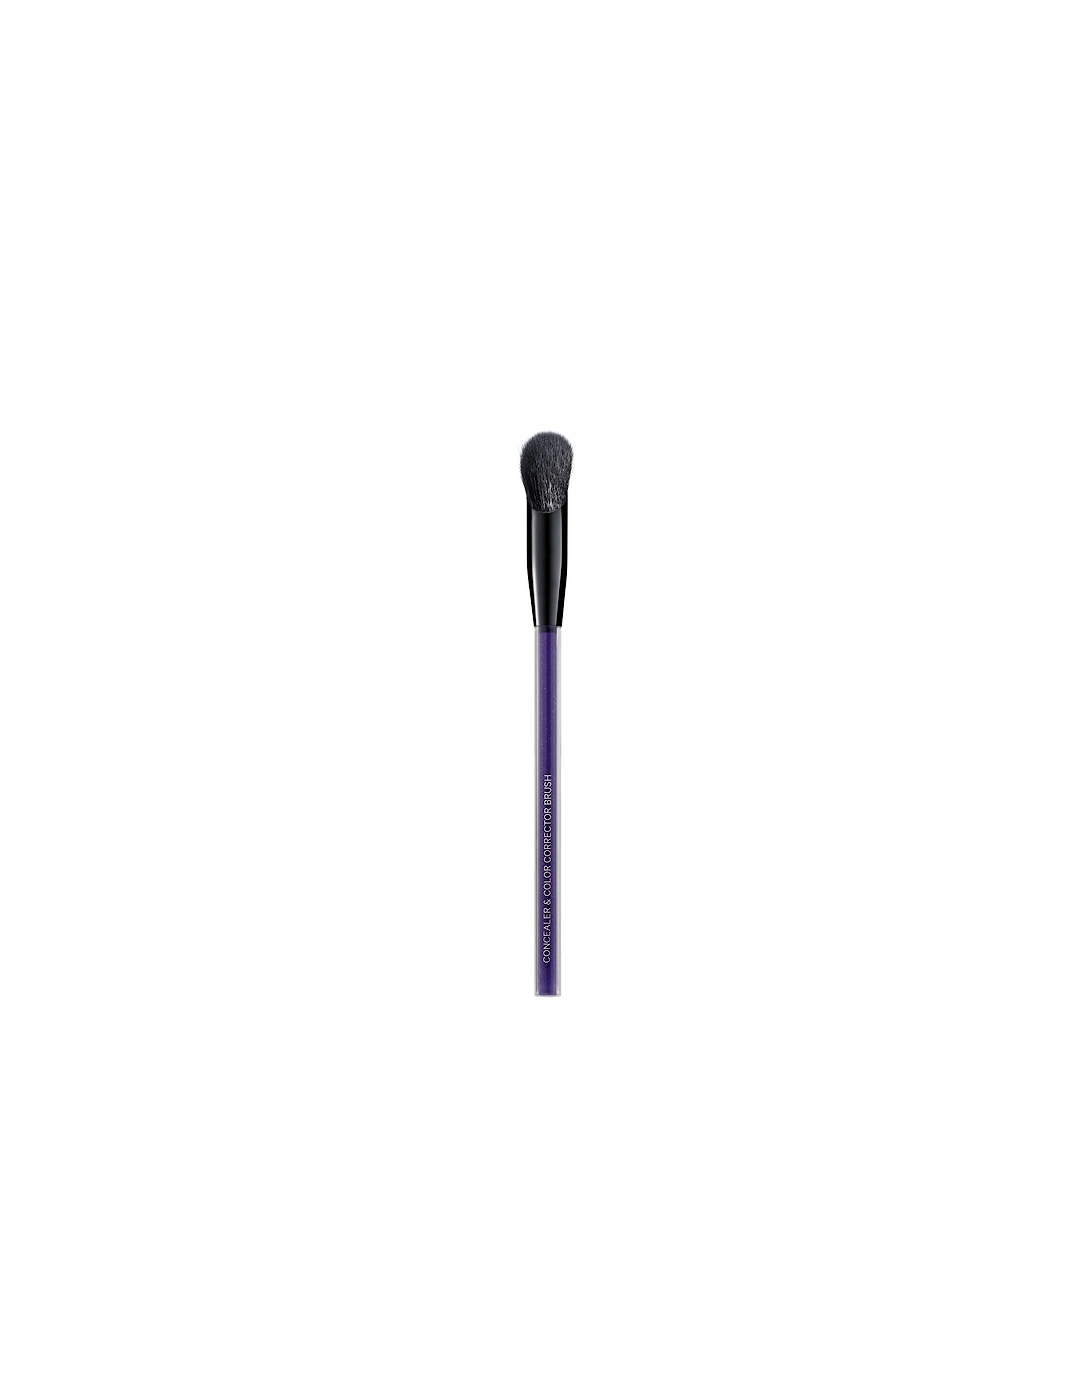 KAB Concealer and Color Corrector Brush, 2 of 1